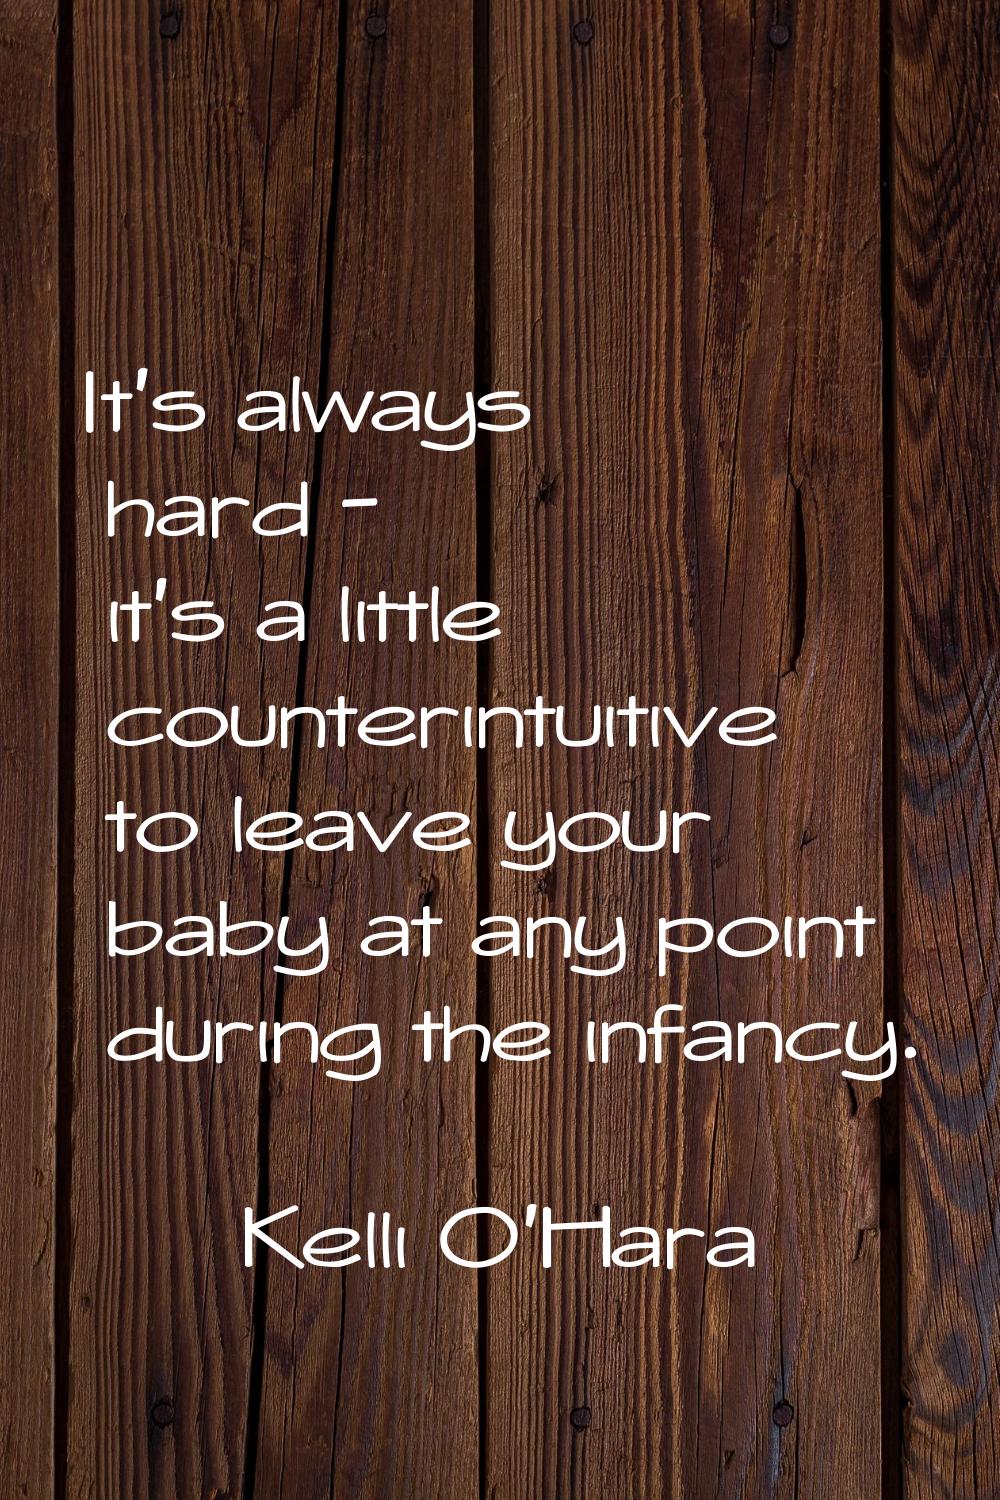 It's always hard - it's a little counterintuitive to leave your baby at any point during the infanc